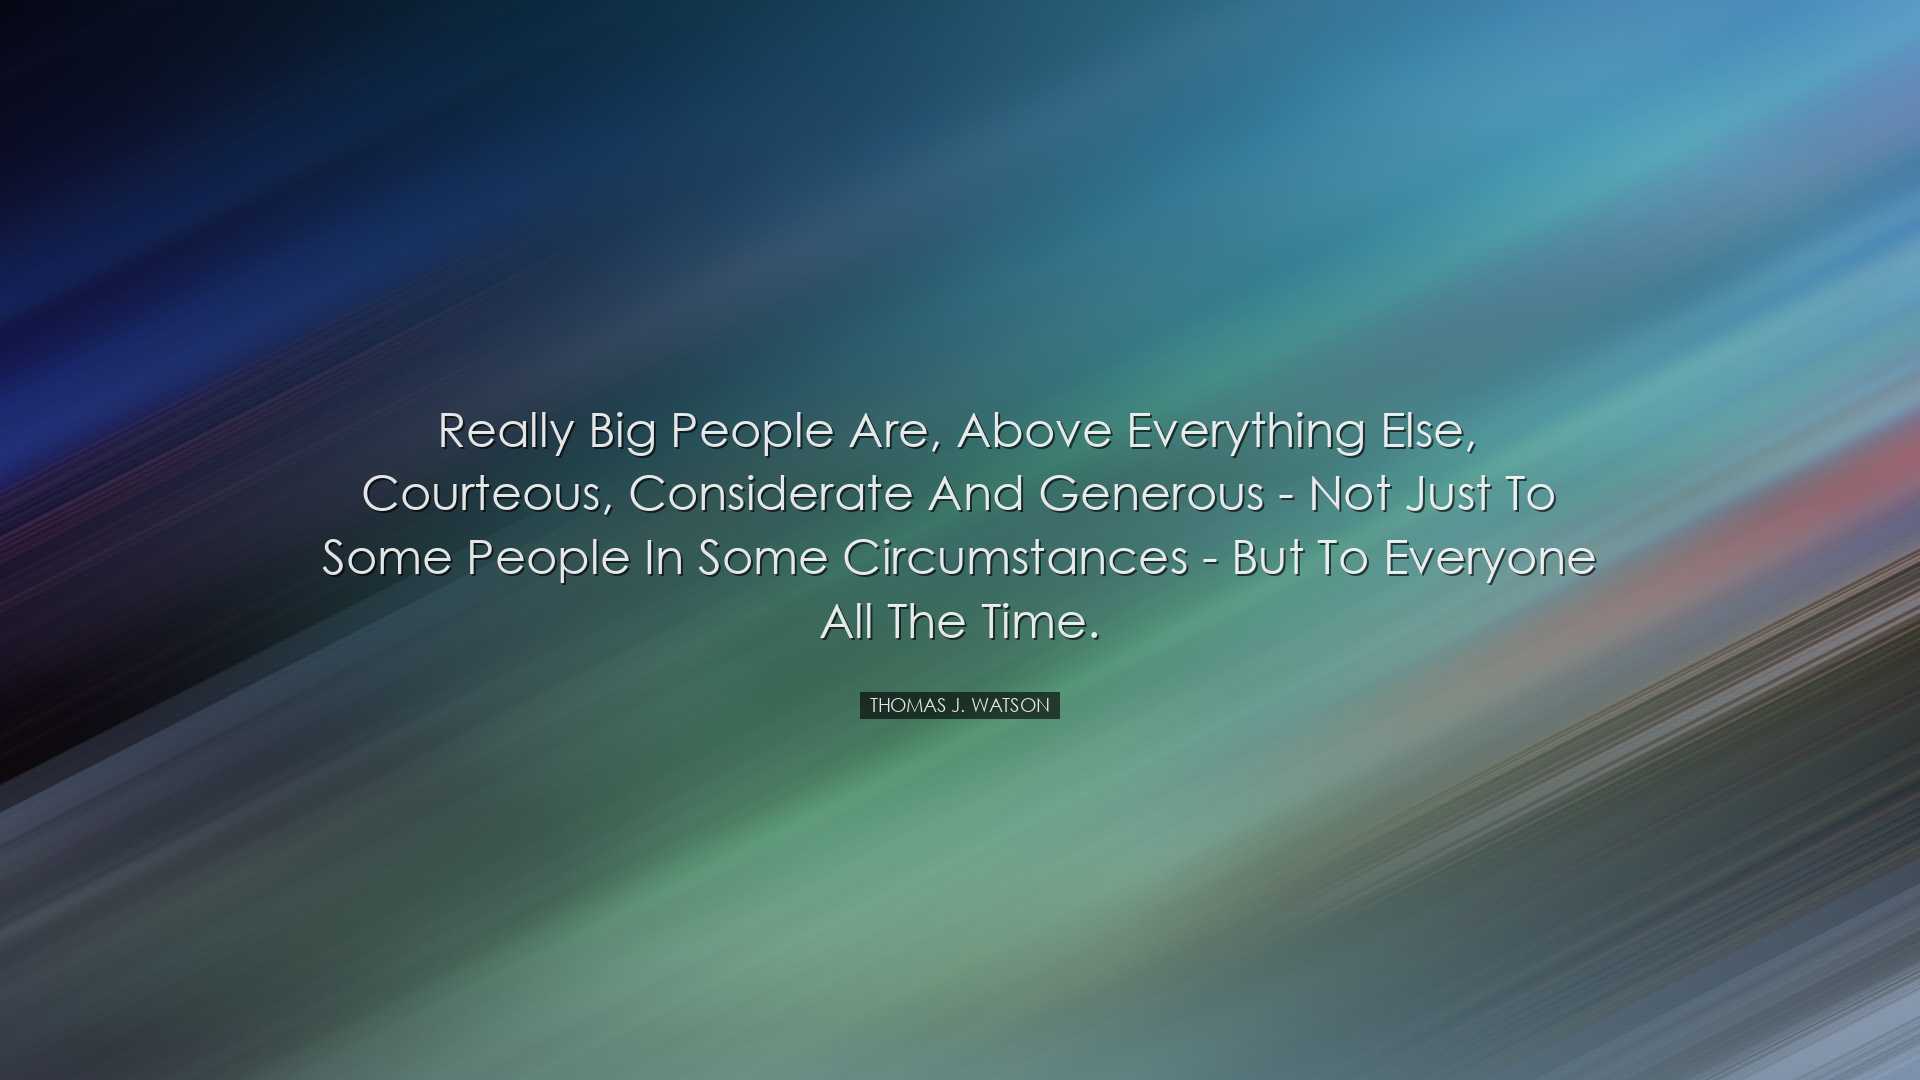 Really big people are, above everything else, courteous, considera